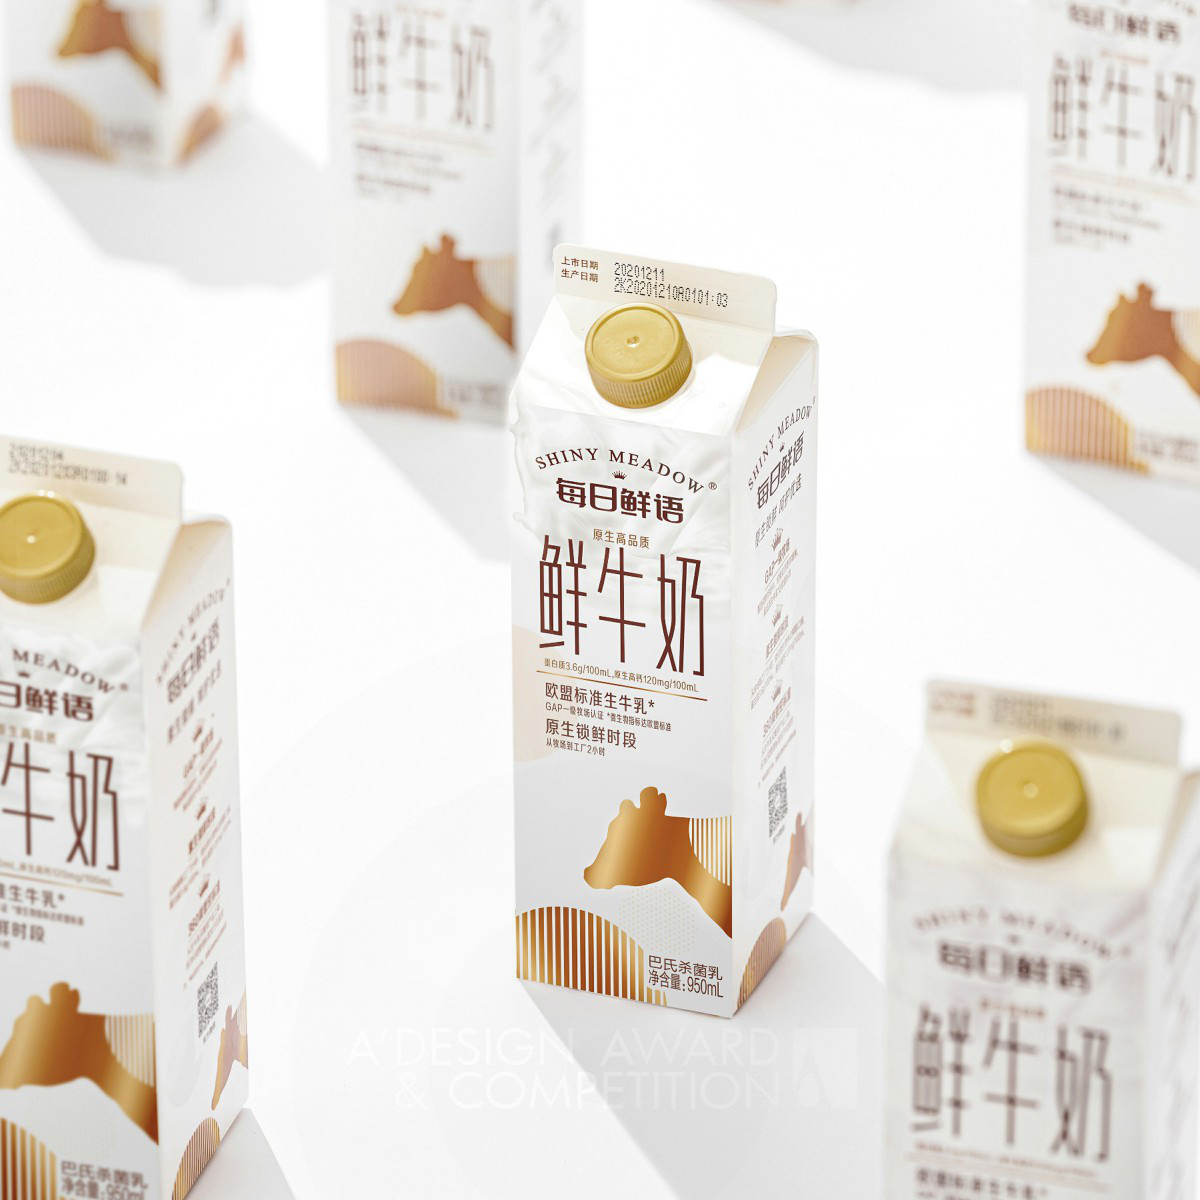 Shiny Meadow Milk Package  by Mengniu Fresh Dairy Products Co., Ltd